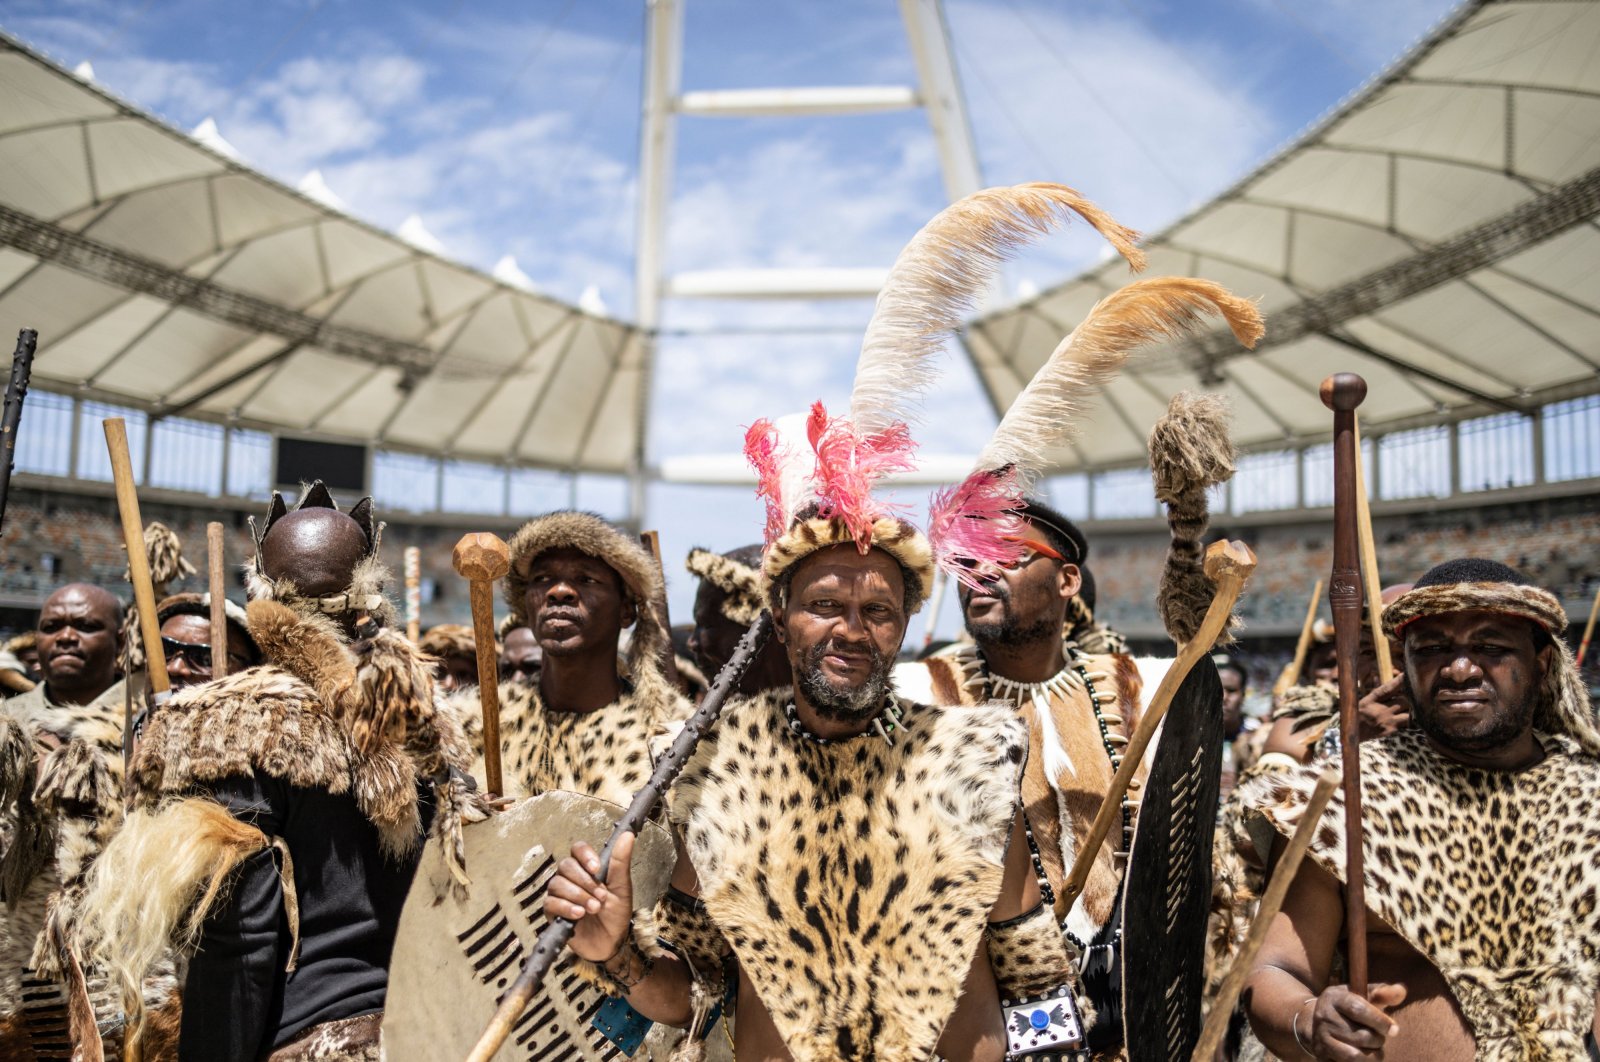 Amabutho, Zulu King regiments, clad in traditional dress and carrying shields and sticks, are seen at the Moses Mabhida Stadium in Durban, South Africa, Oct. 29, 2022. (AFP Photo)